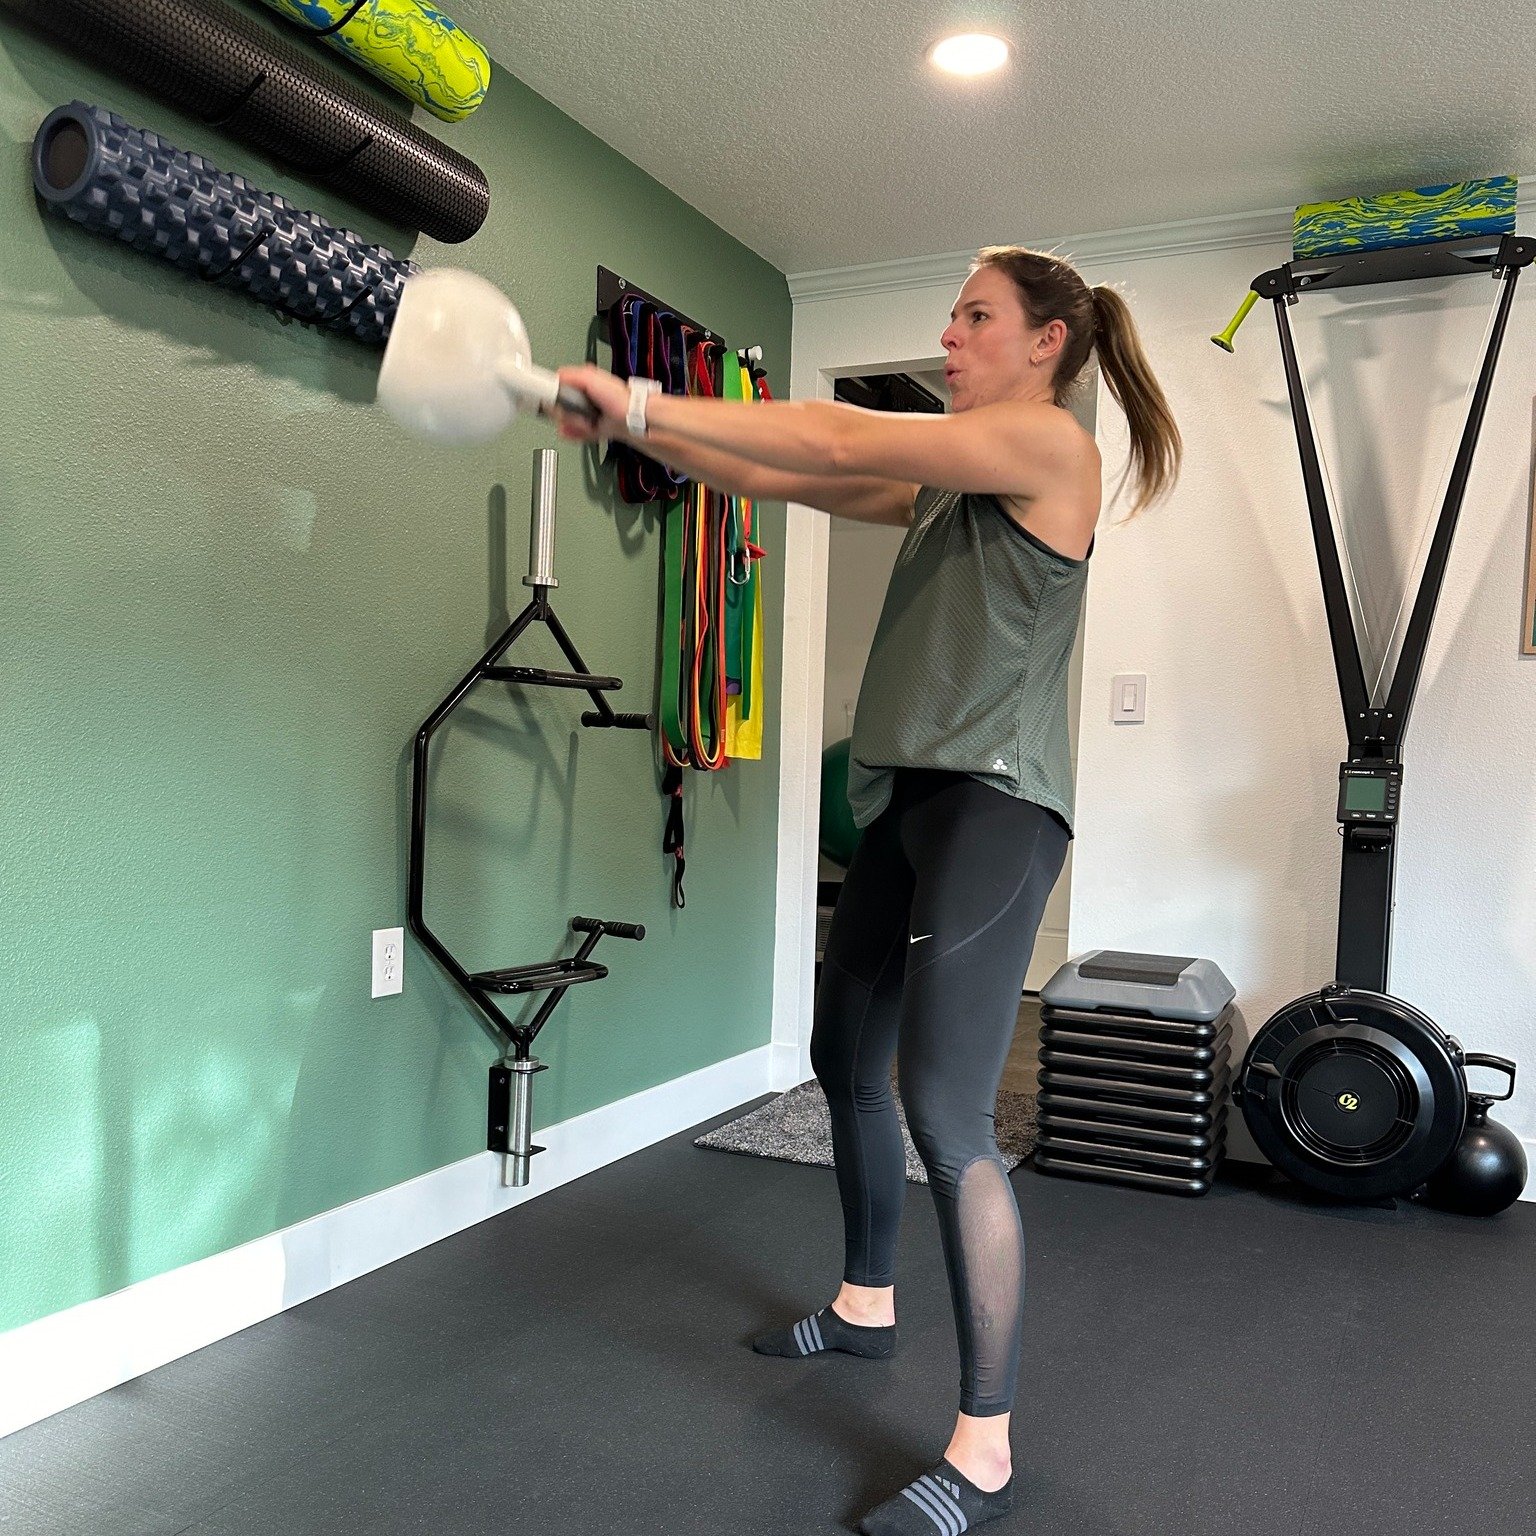 Spice up your routine with kettlebell swings, an explosive exercise for the hips. You'll be swinging heavyweight, and I can help you dial in your form to progress safely. Connect today for your free consultation.  #personaltraining #gym #privateperso